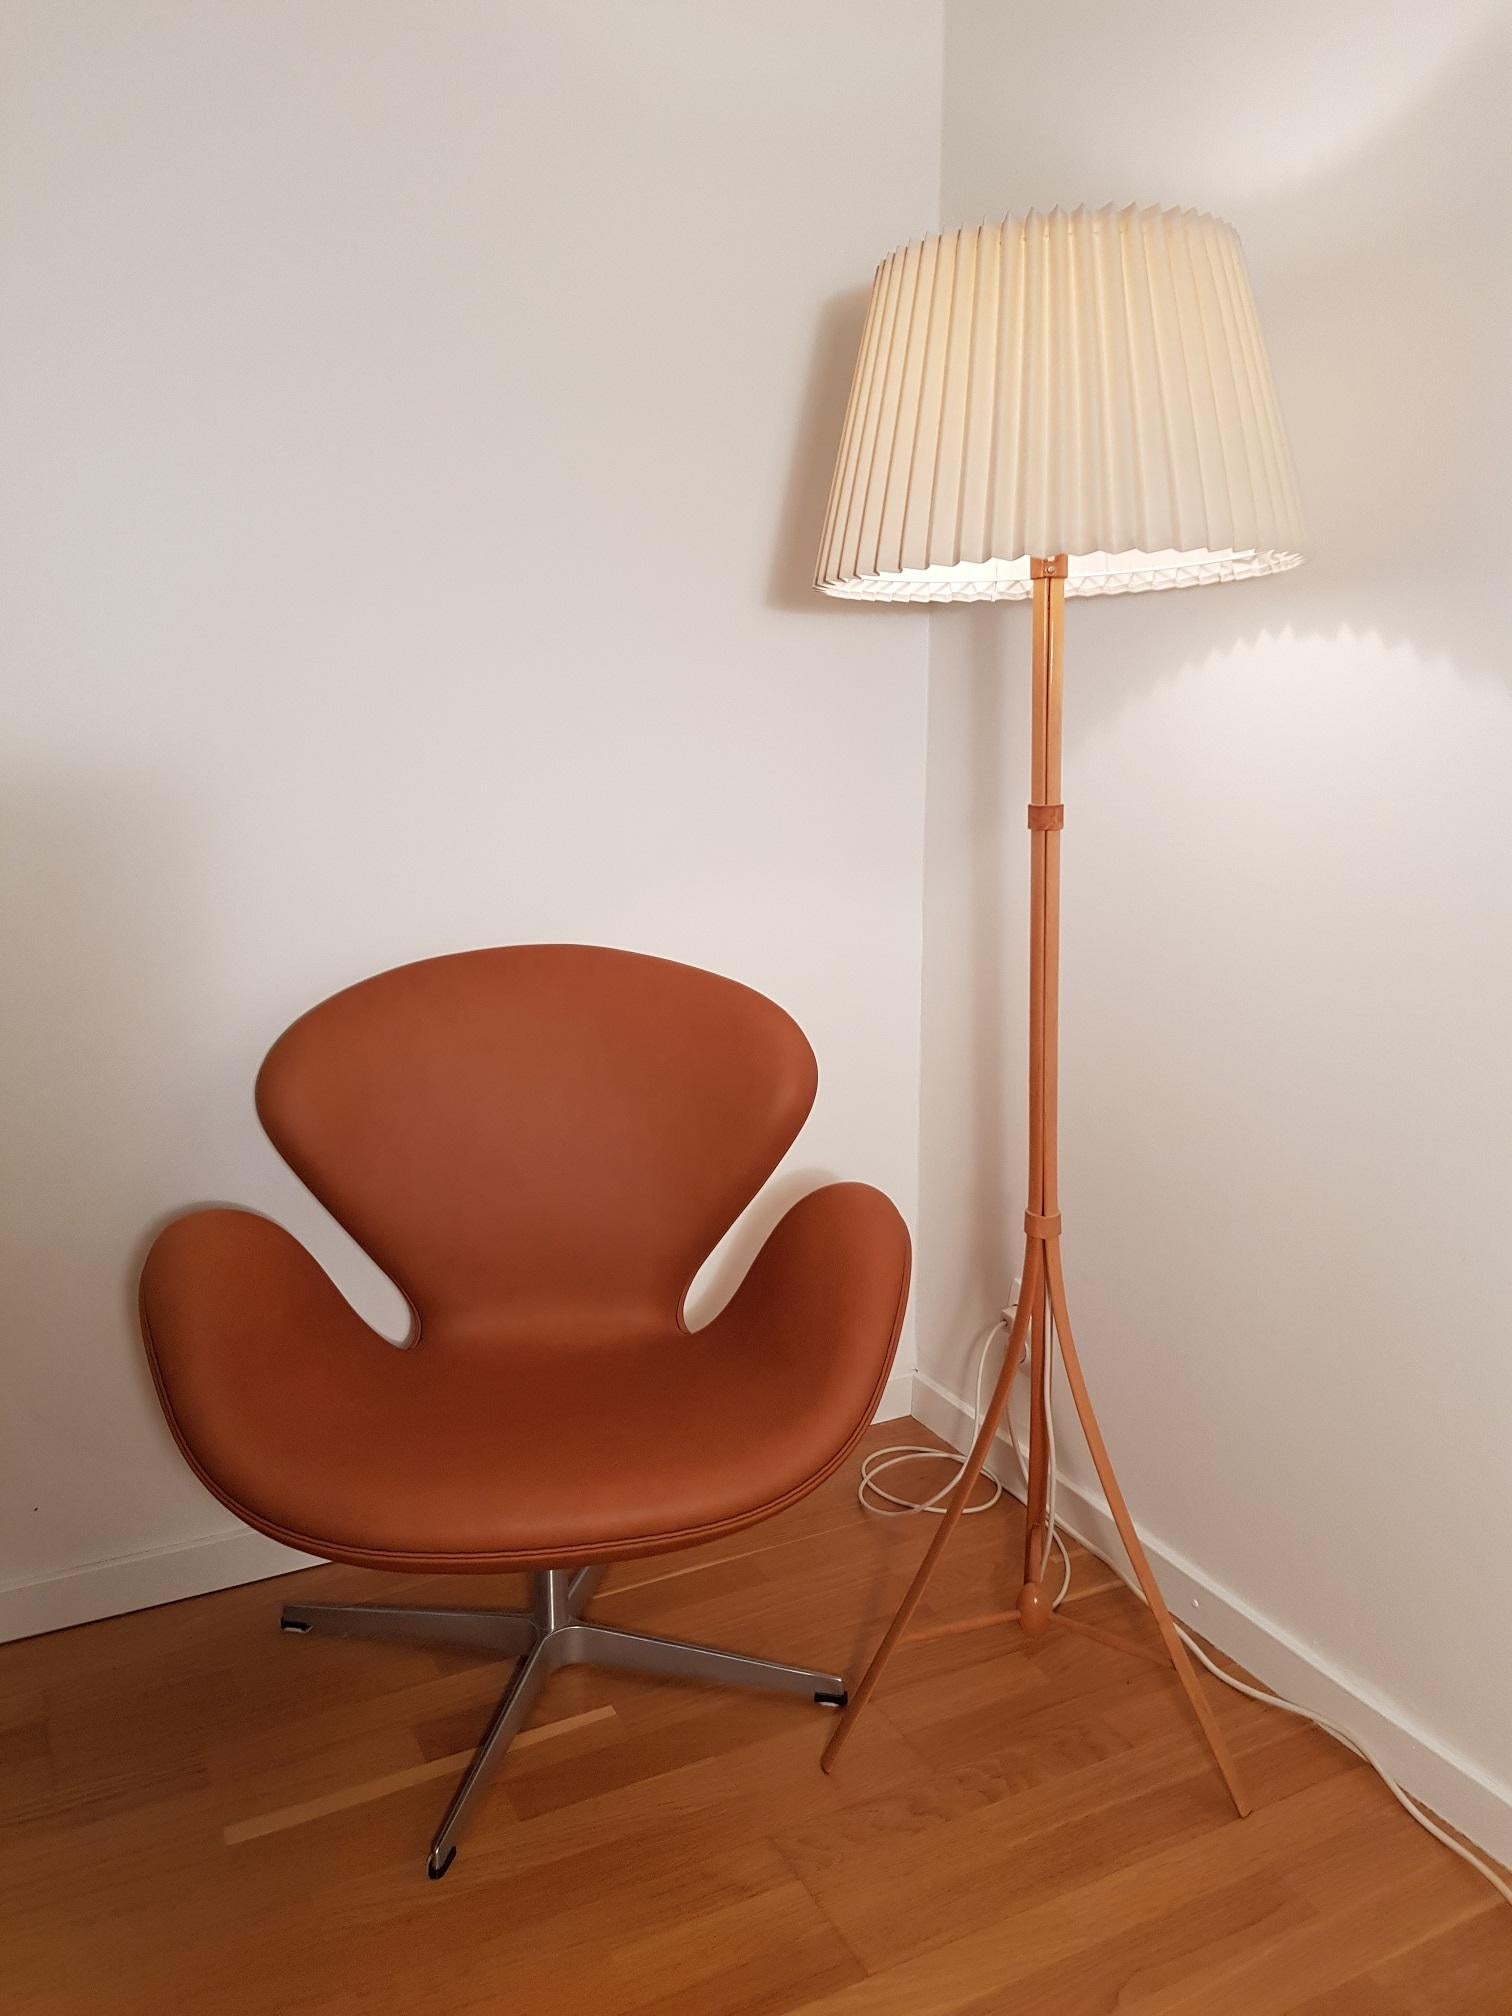 1 Swedish vintage floor lamp from the 1950s. Beech, leather and fabric shade. Designed by Alf Svensson for Bergboms, Sweden. The shade is new and also made in Sweden. Scandinavian Mid-Century Modern - wood, leather and fabric in harmony.